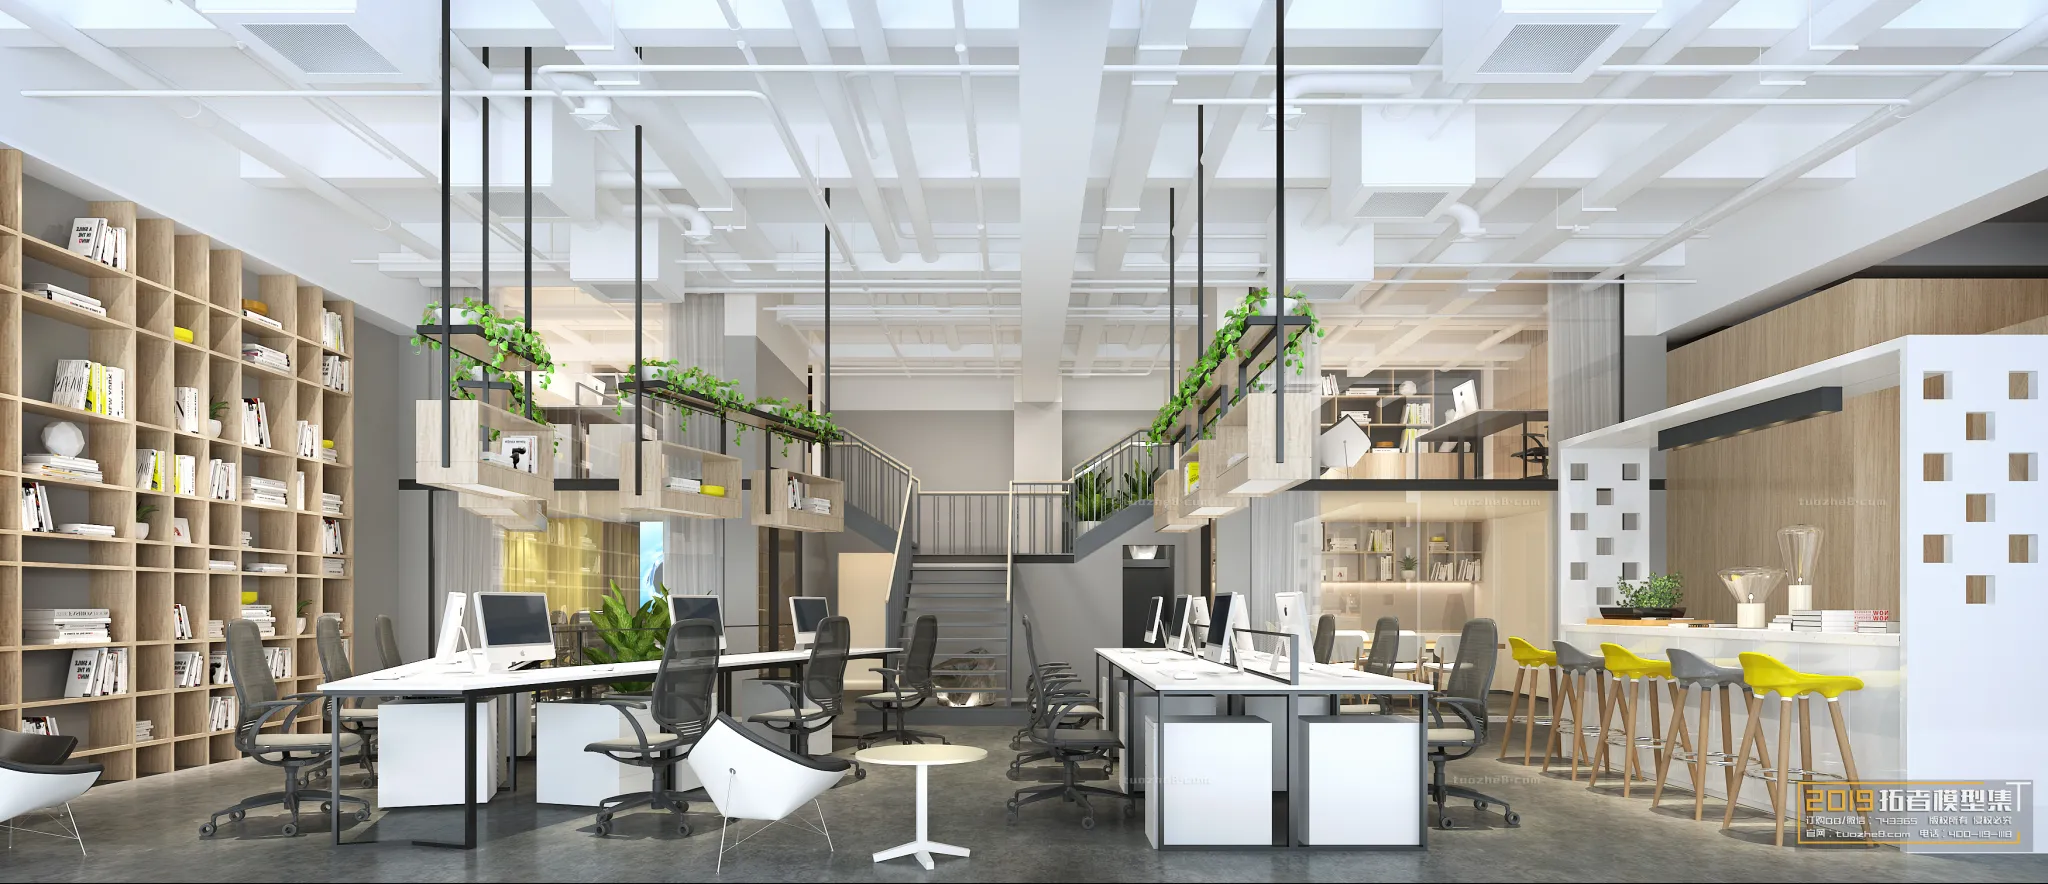 Extension Interior – OFFICE SPACE – 014